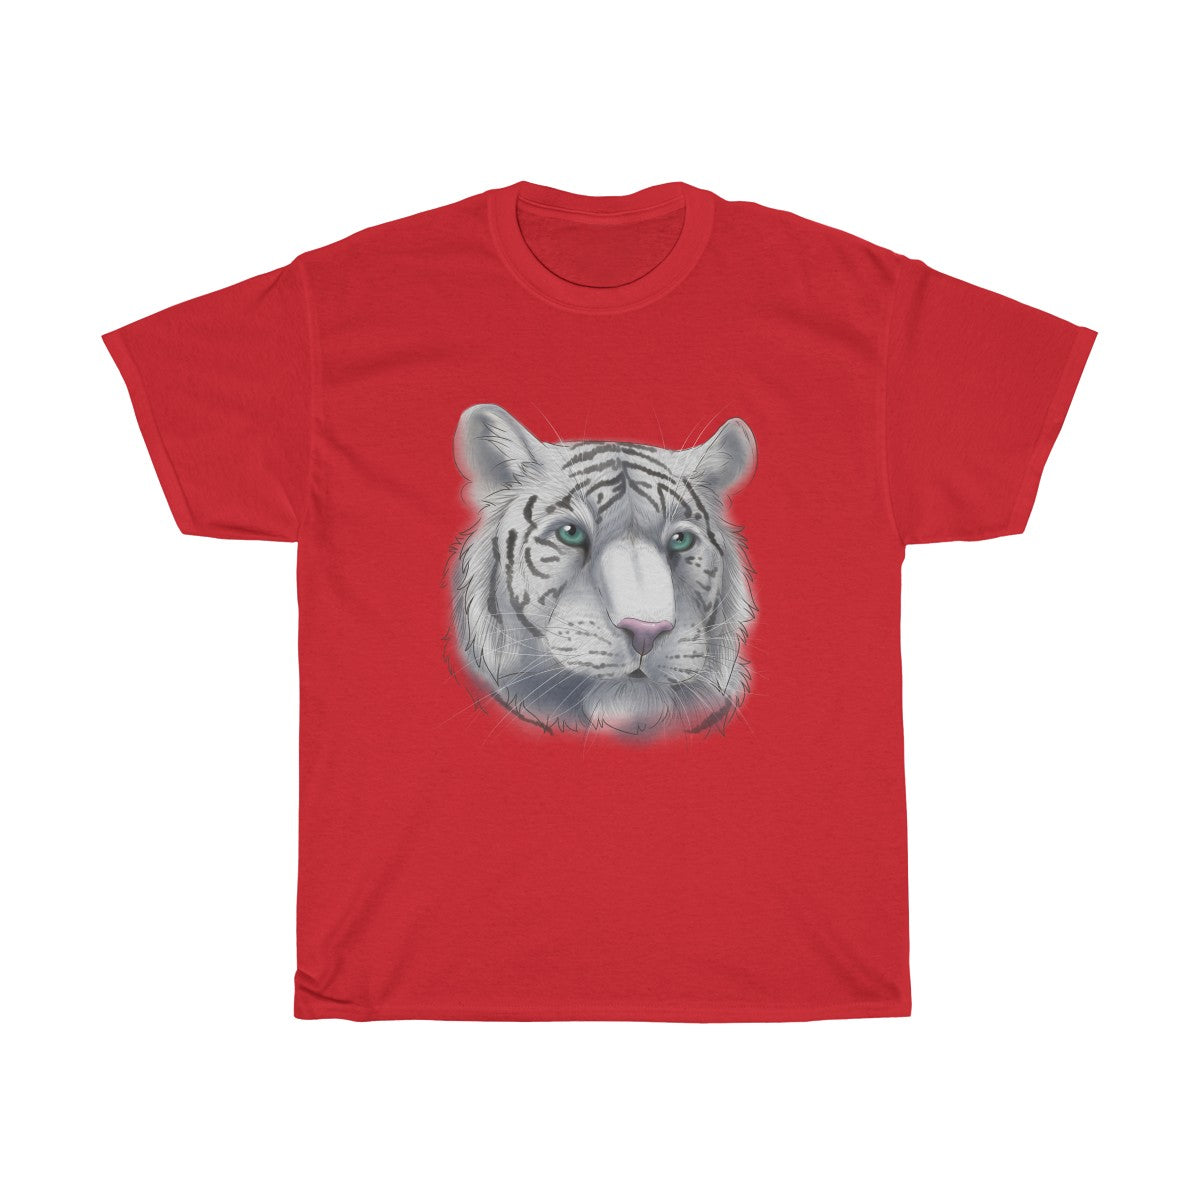 White Tiger - T-Shirt T-Shirt Dire Creatures Red S 